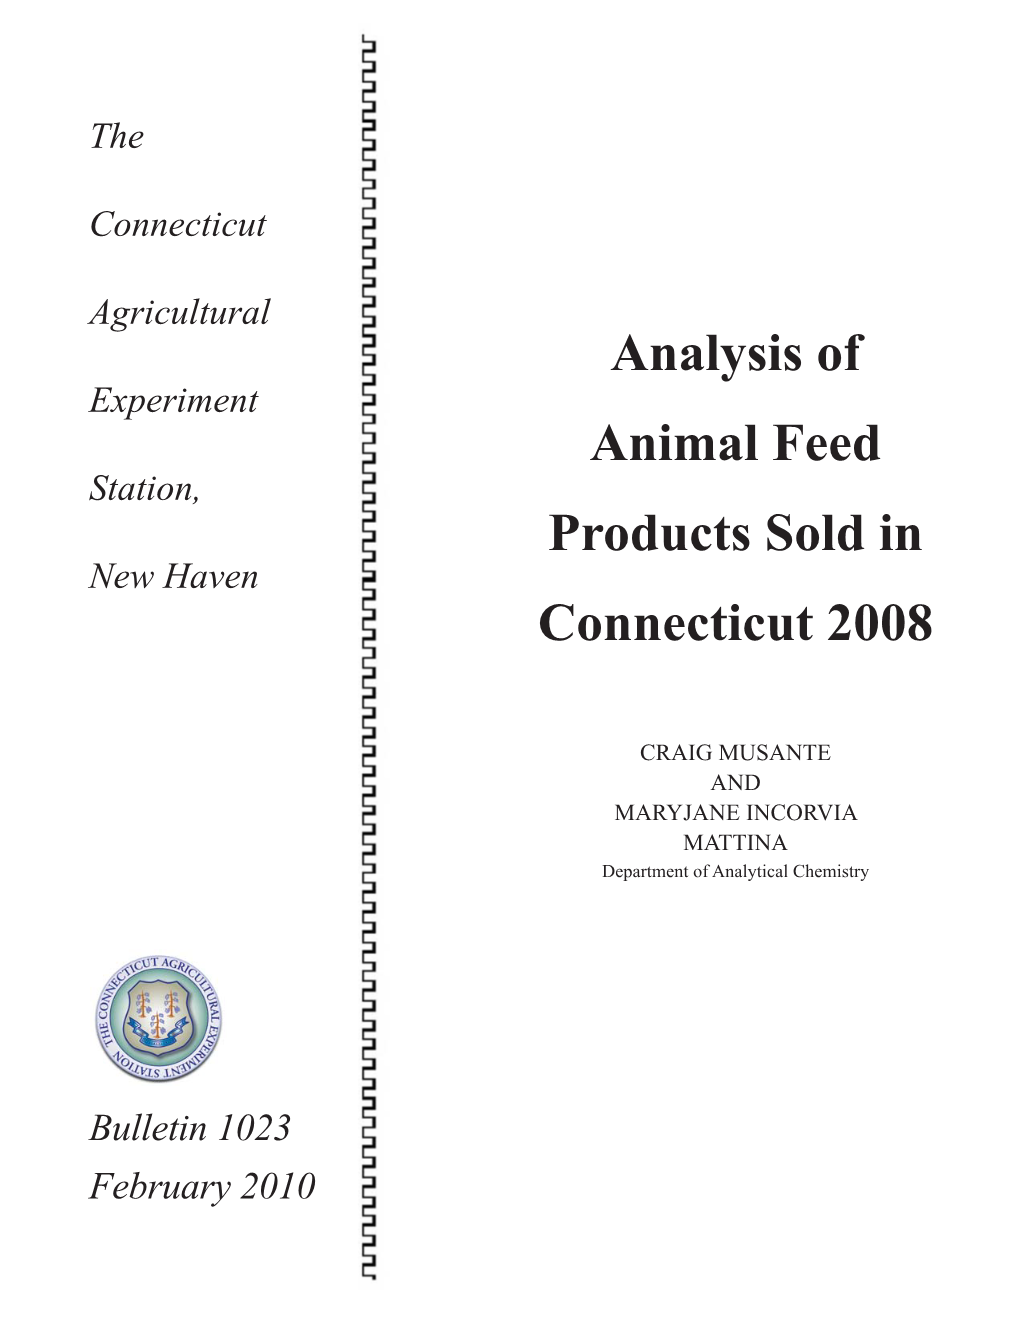 Analysis of Animal Feed Products Sold in Connecticut 2008